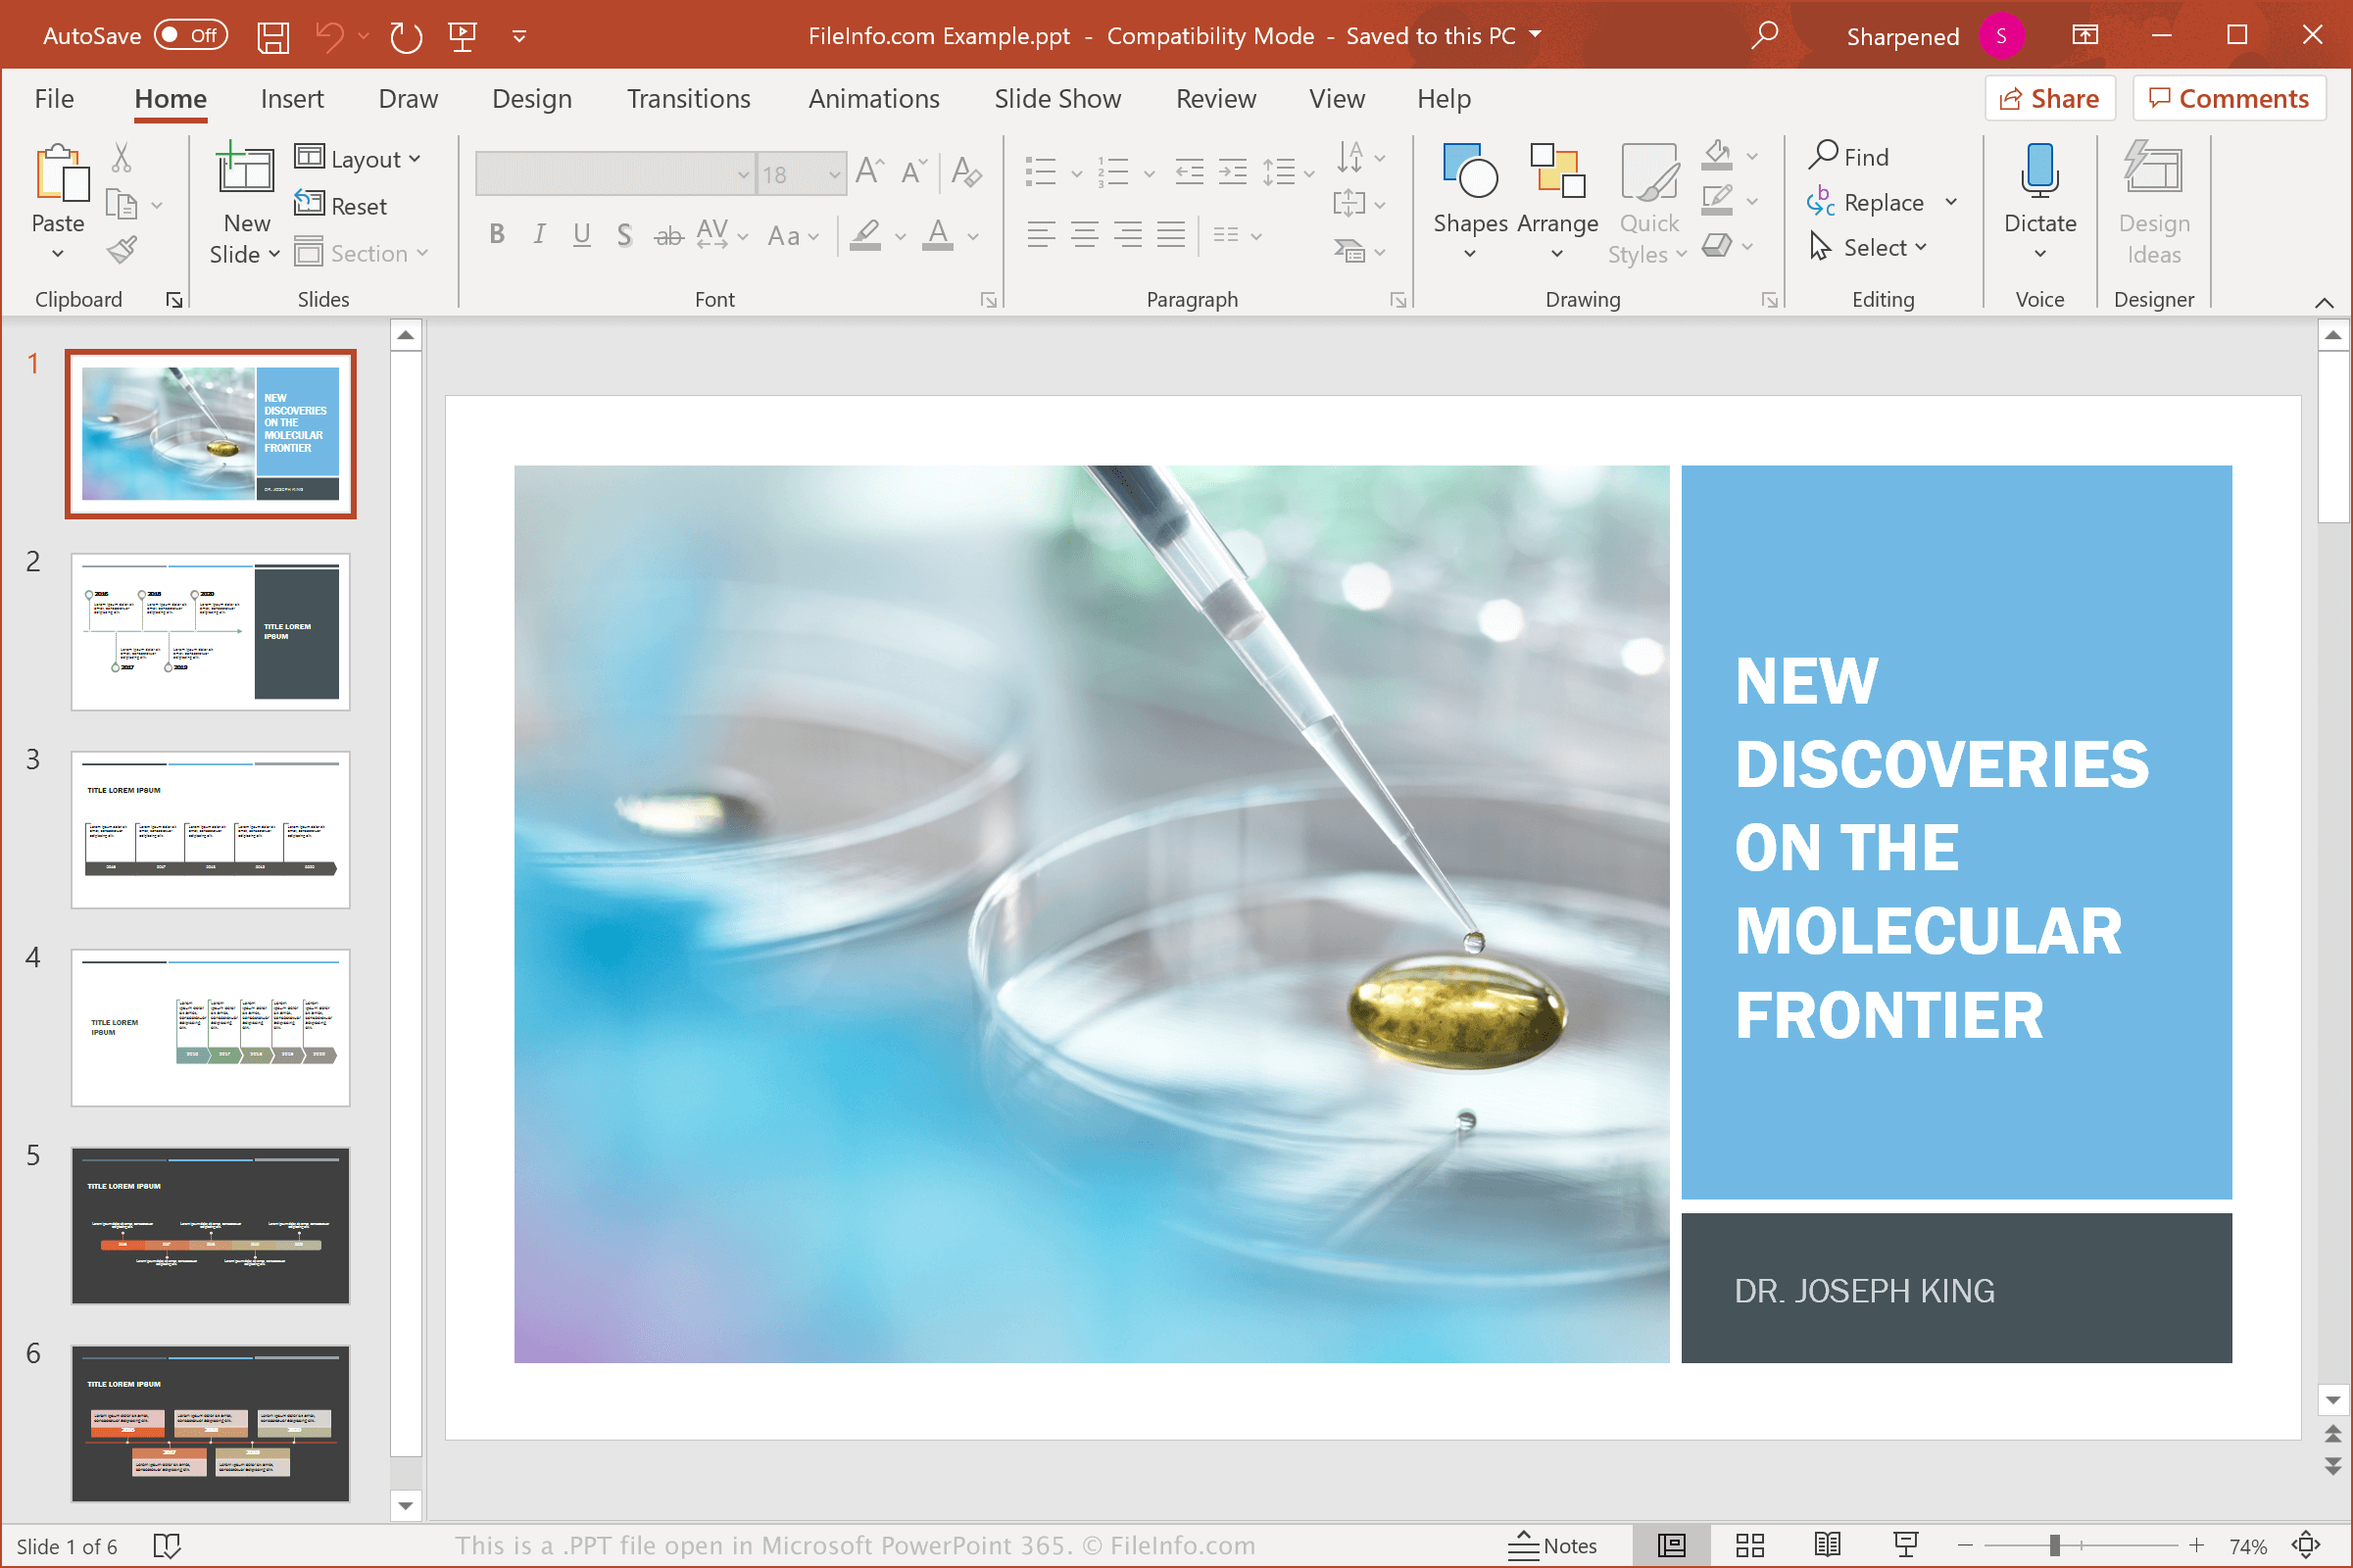 what is the powerpoint presentation file extension